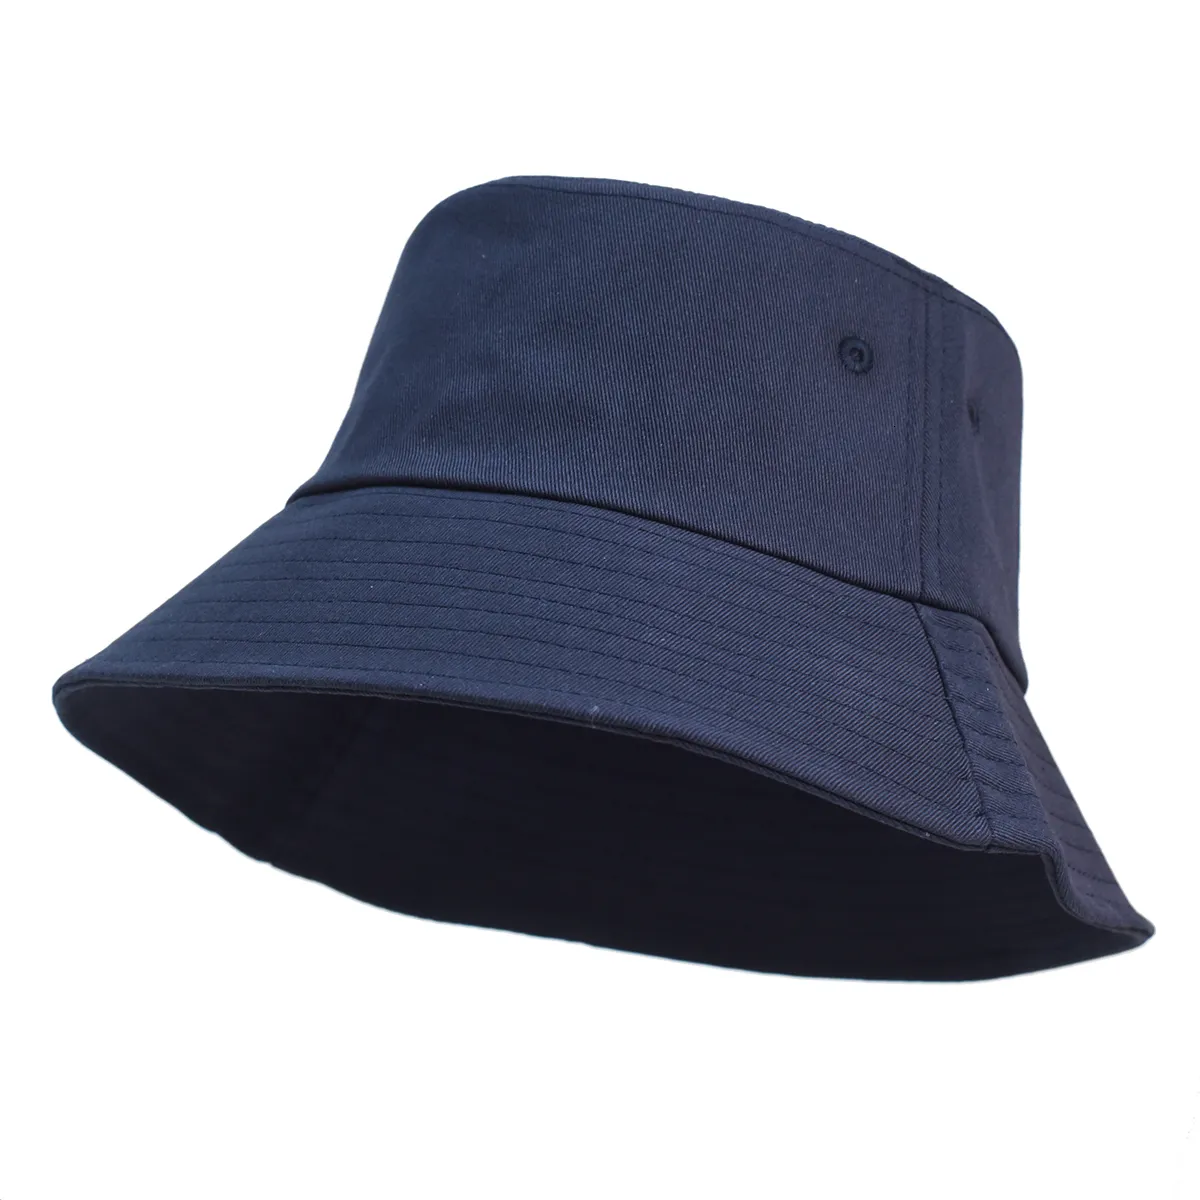 Pure Cotton Wide Brim Army Green Bucket Hat For Men And Women Large Size Sun  Hat, Blank Fisherman Hat With Panama Cap Plus Size 56 58cm 58 62cm Item  #230828 From Yao05, $7.74